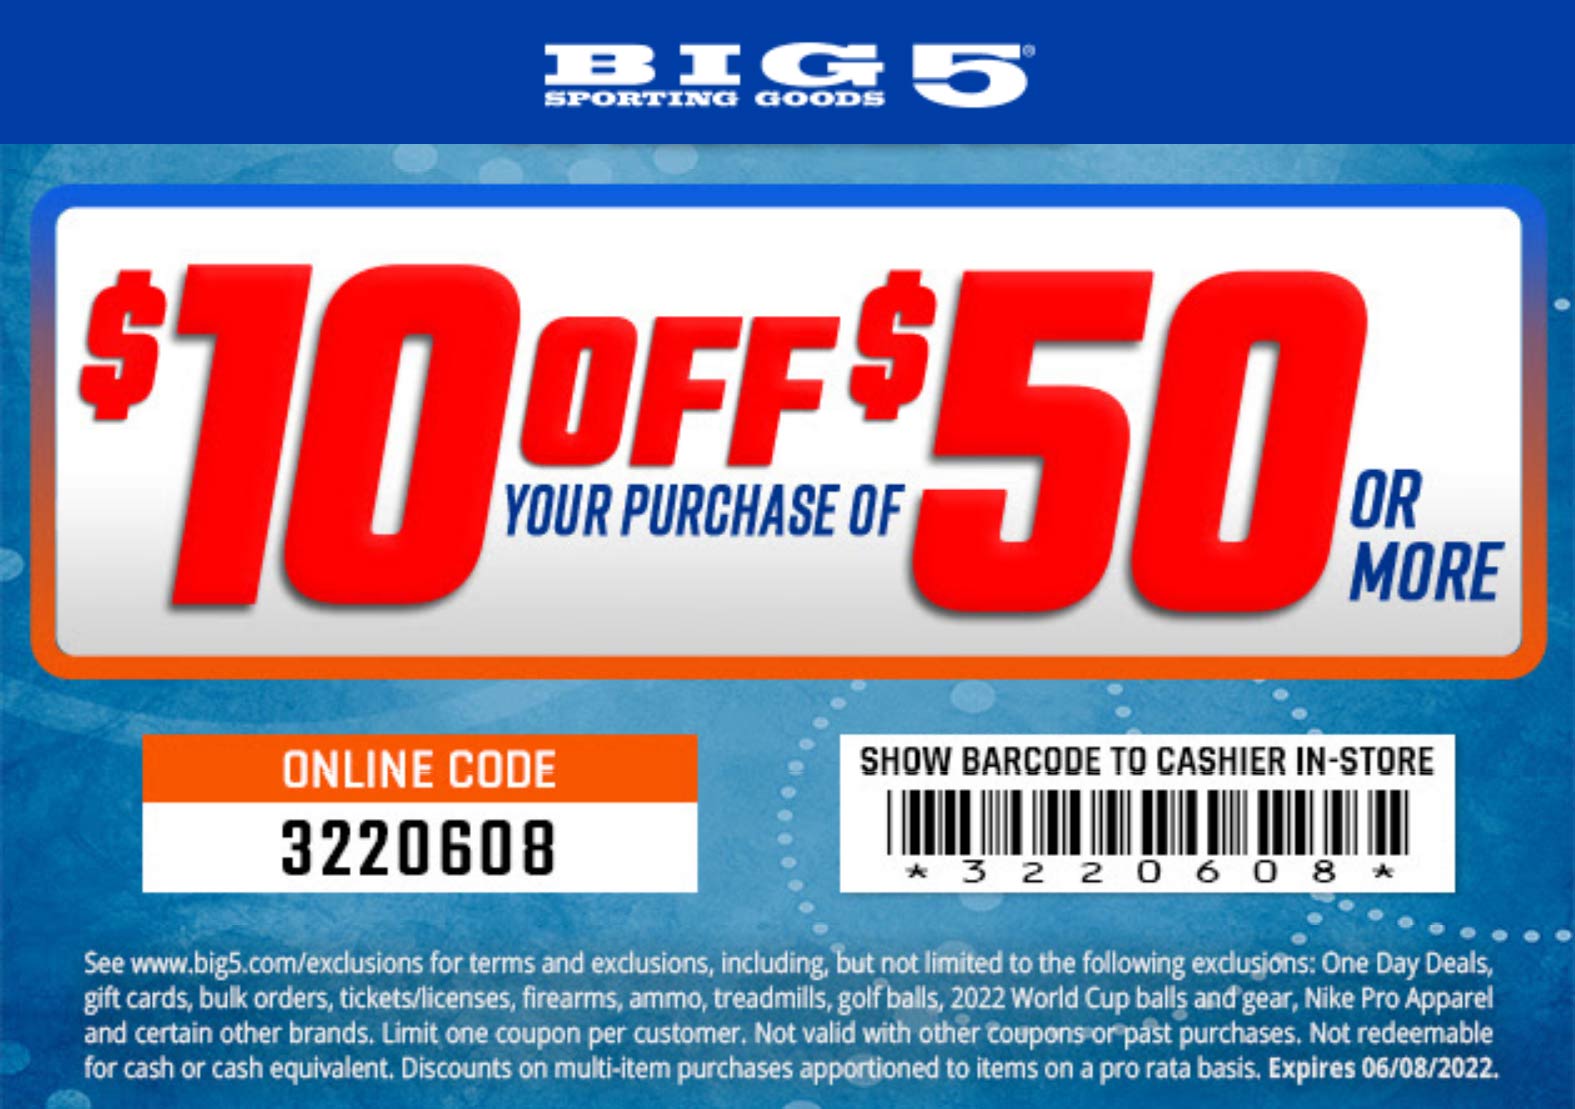 Big 5 stores Coupon  $10 off $50 today at Big 5 sporting goods, or online via promo code 3220608 #big5 